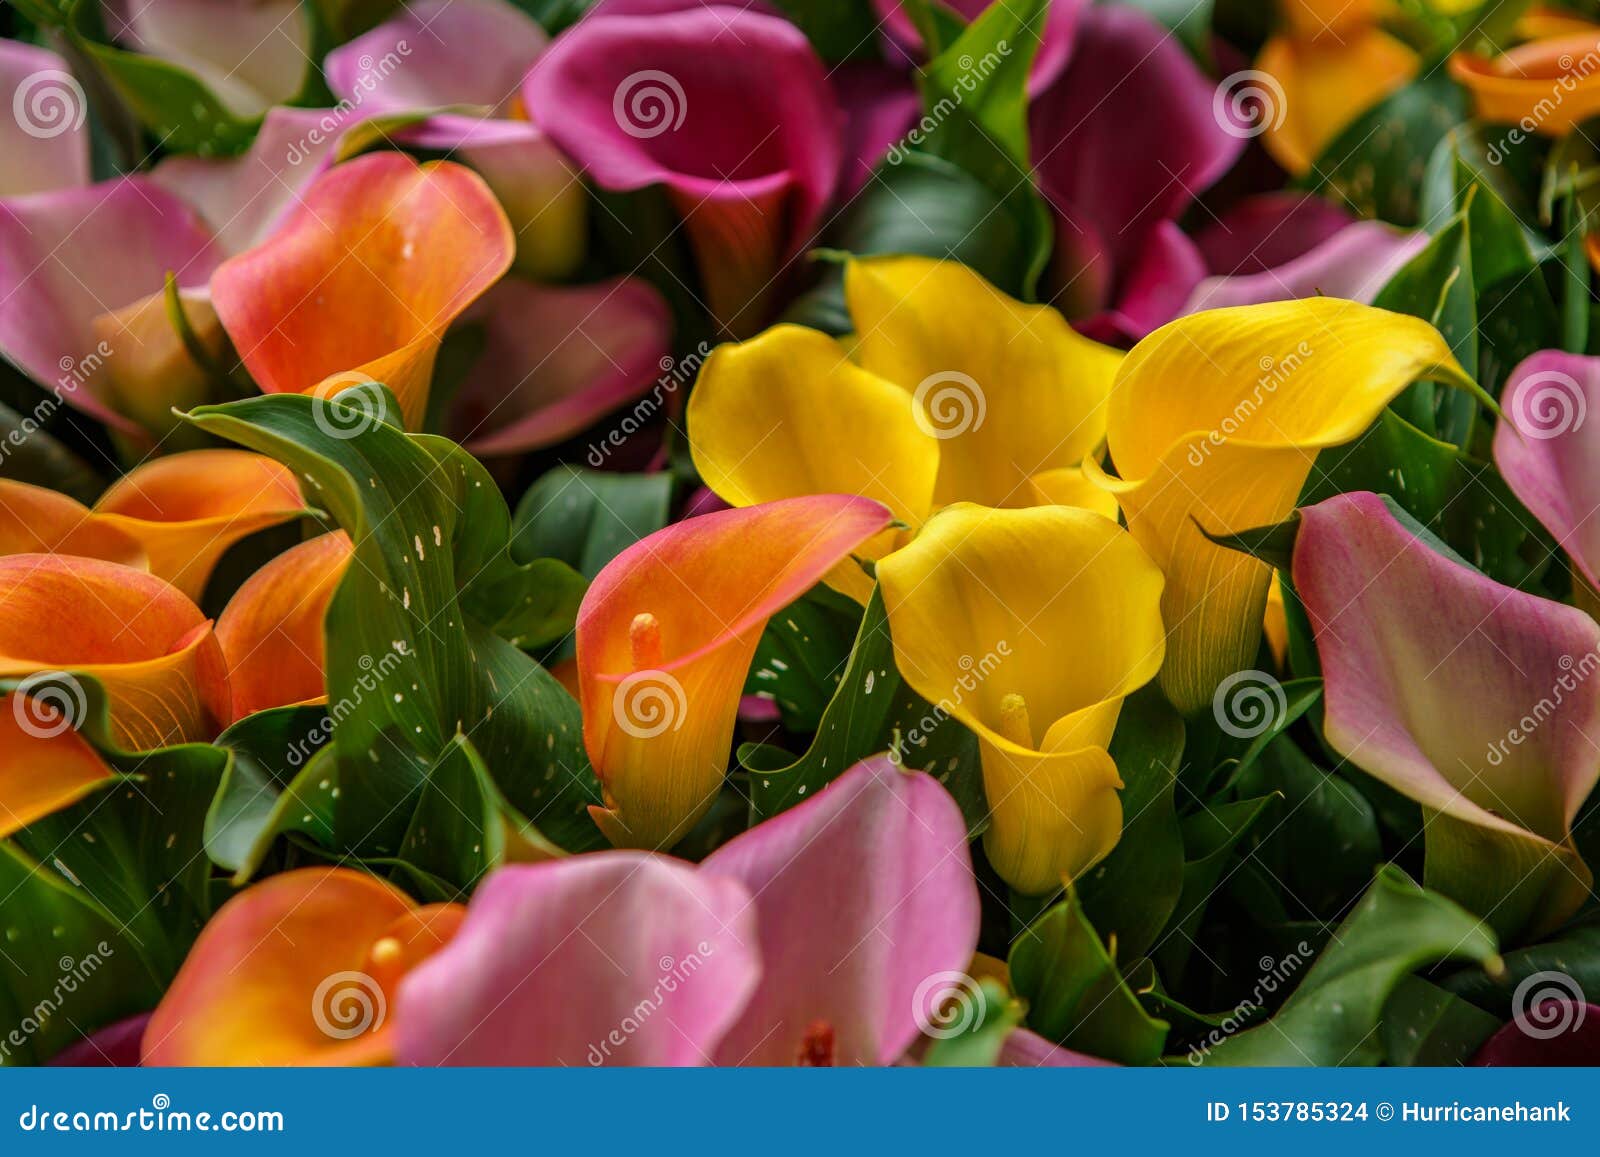 Beautiful Exotic Tulip Flowers Cultivated in Netherlands Garden Stock ...